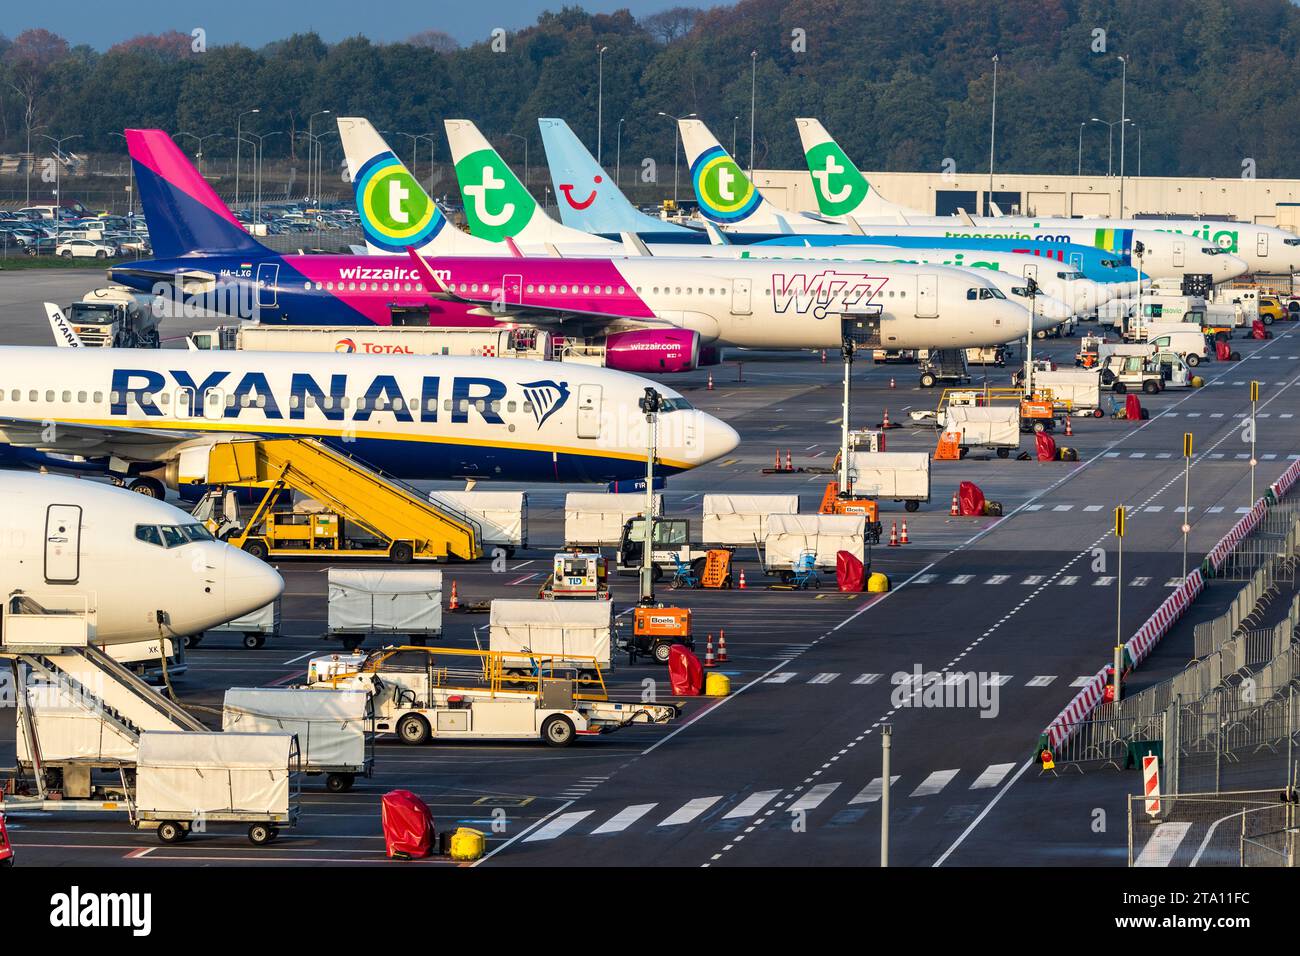 Various low-budget airline aircraft parked at the terminal of Eindhoven-Airport. Eindhoven, The Netherlands - October 25, 2017 Stock Photo